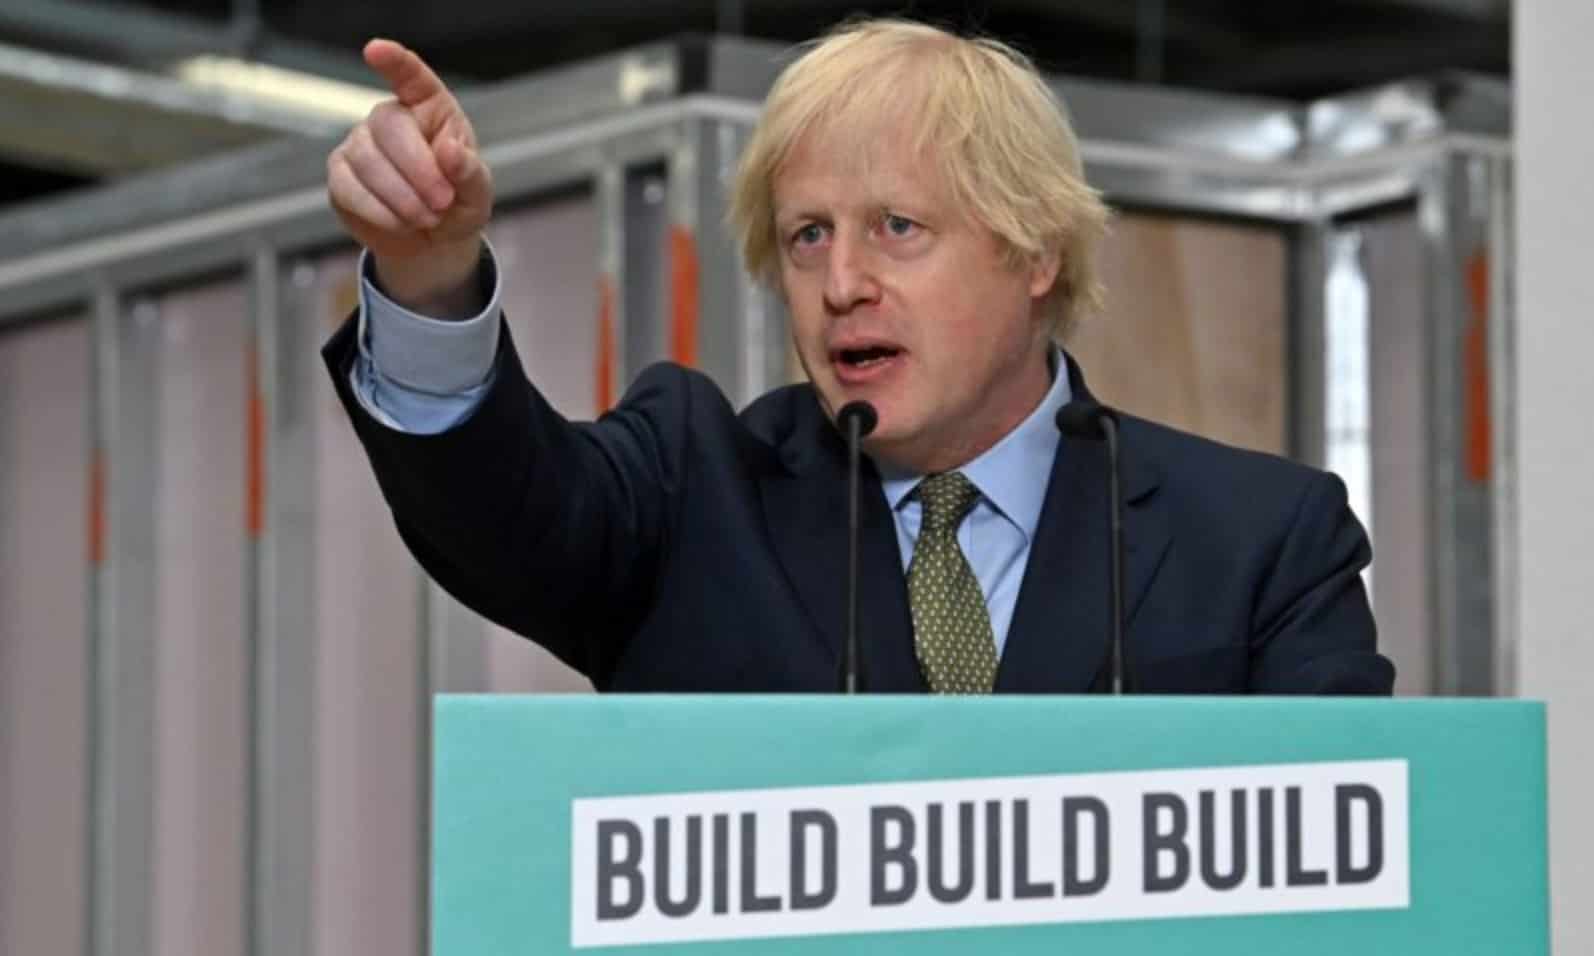 A white man in a suit points his finger, and speaks from behind a stand which has 'Build Build Build' written on the front